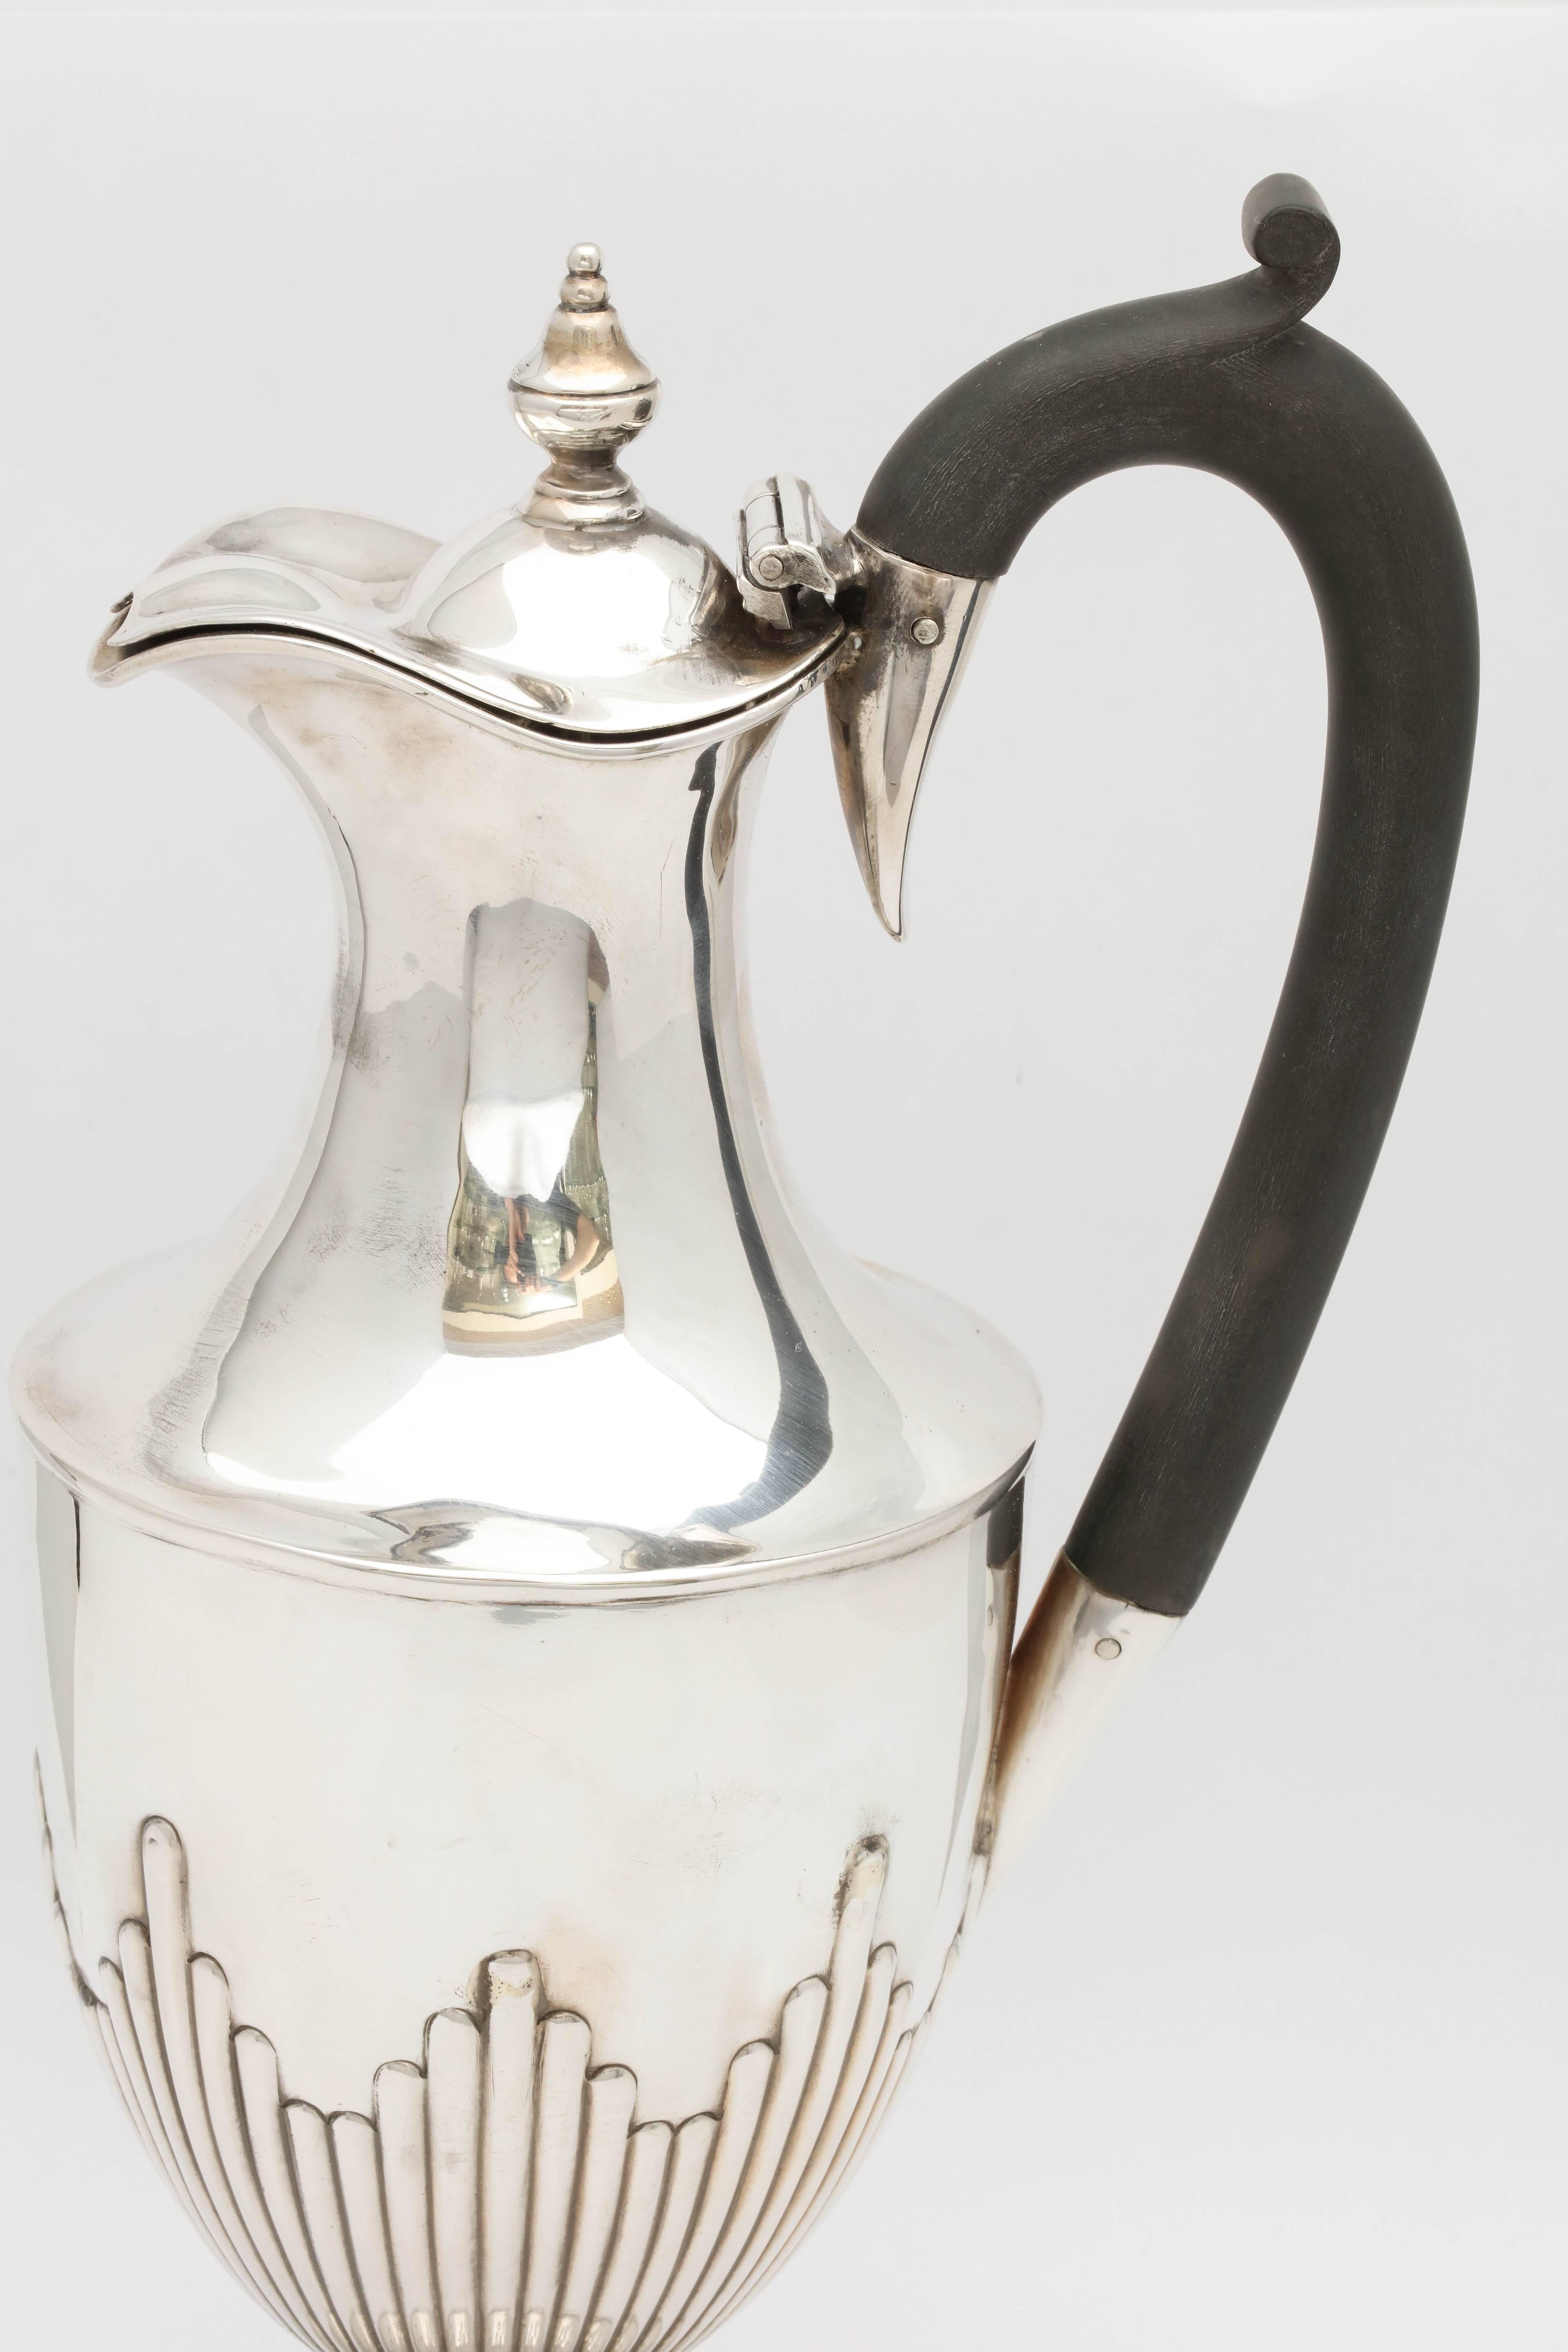 Graceful, Victorian, sterling silver ewer on pedestal base and having a hinged lid and a wooden handle, London, 1890, John A. Lowinkle and Thomas Slater, makers. Lovely, fluted design. Measures: 10 inches high (at highest point) x 4 inches diameter